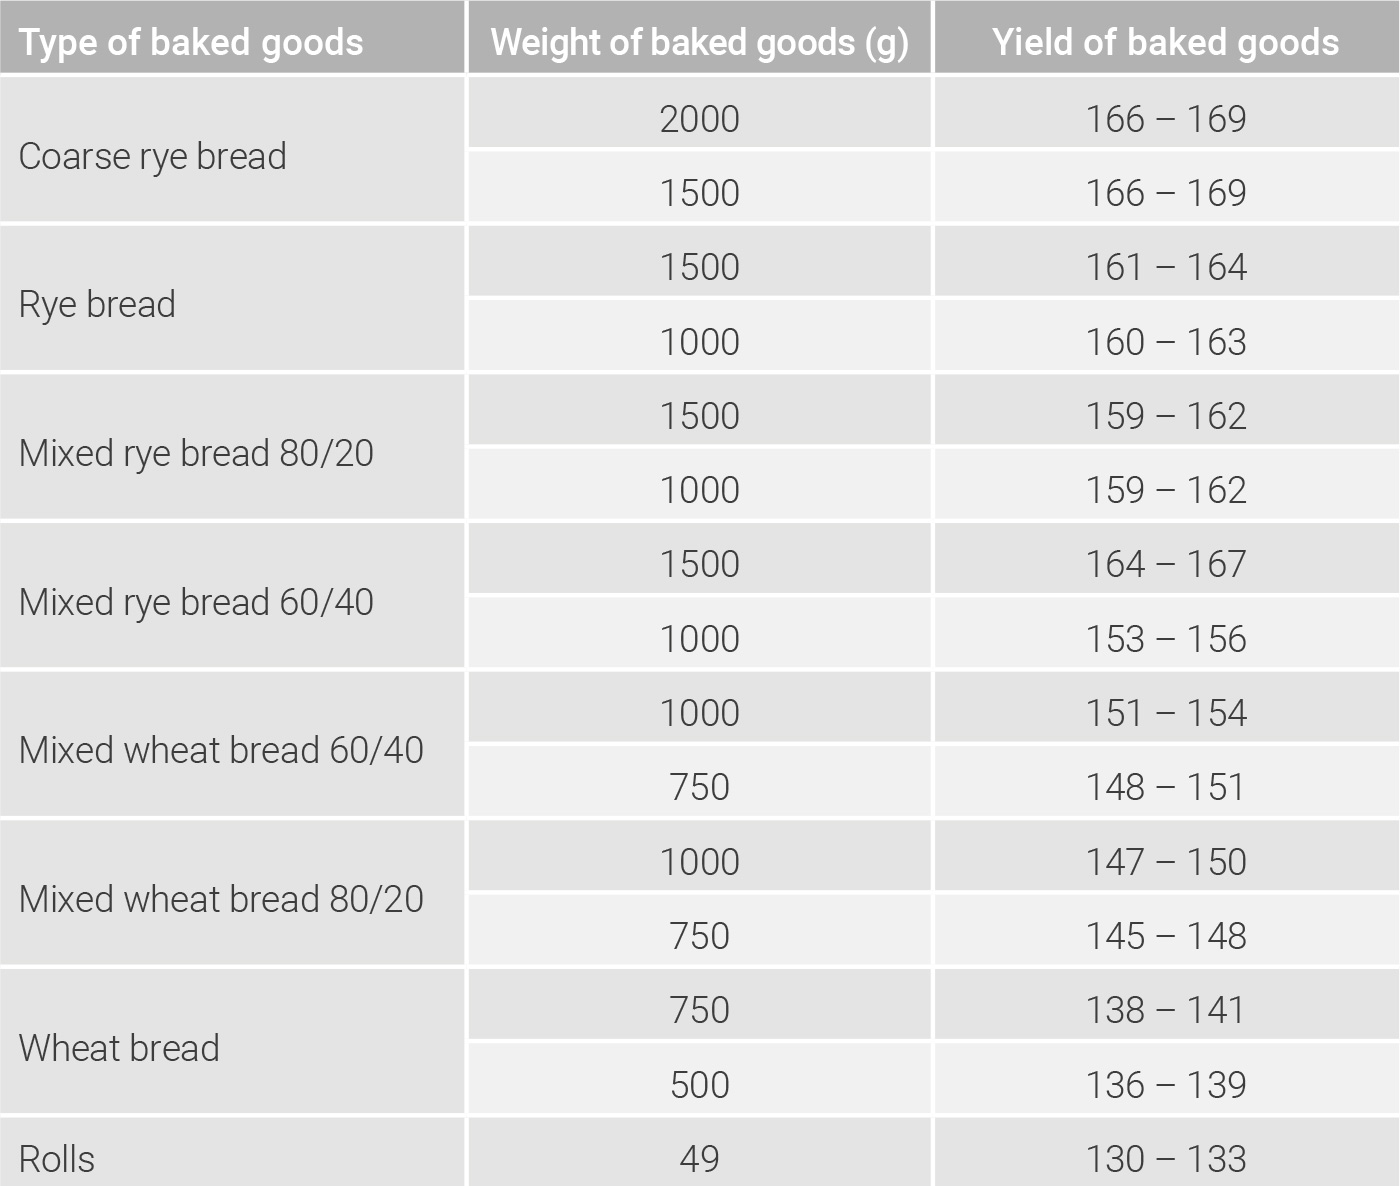 Guide values for the pastry yield of various baked goods 